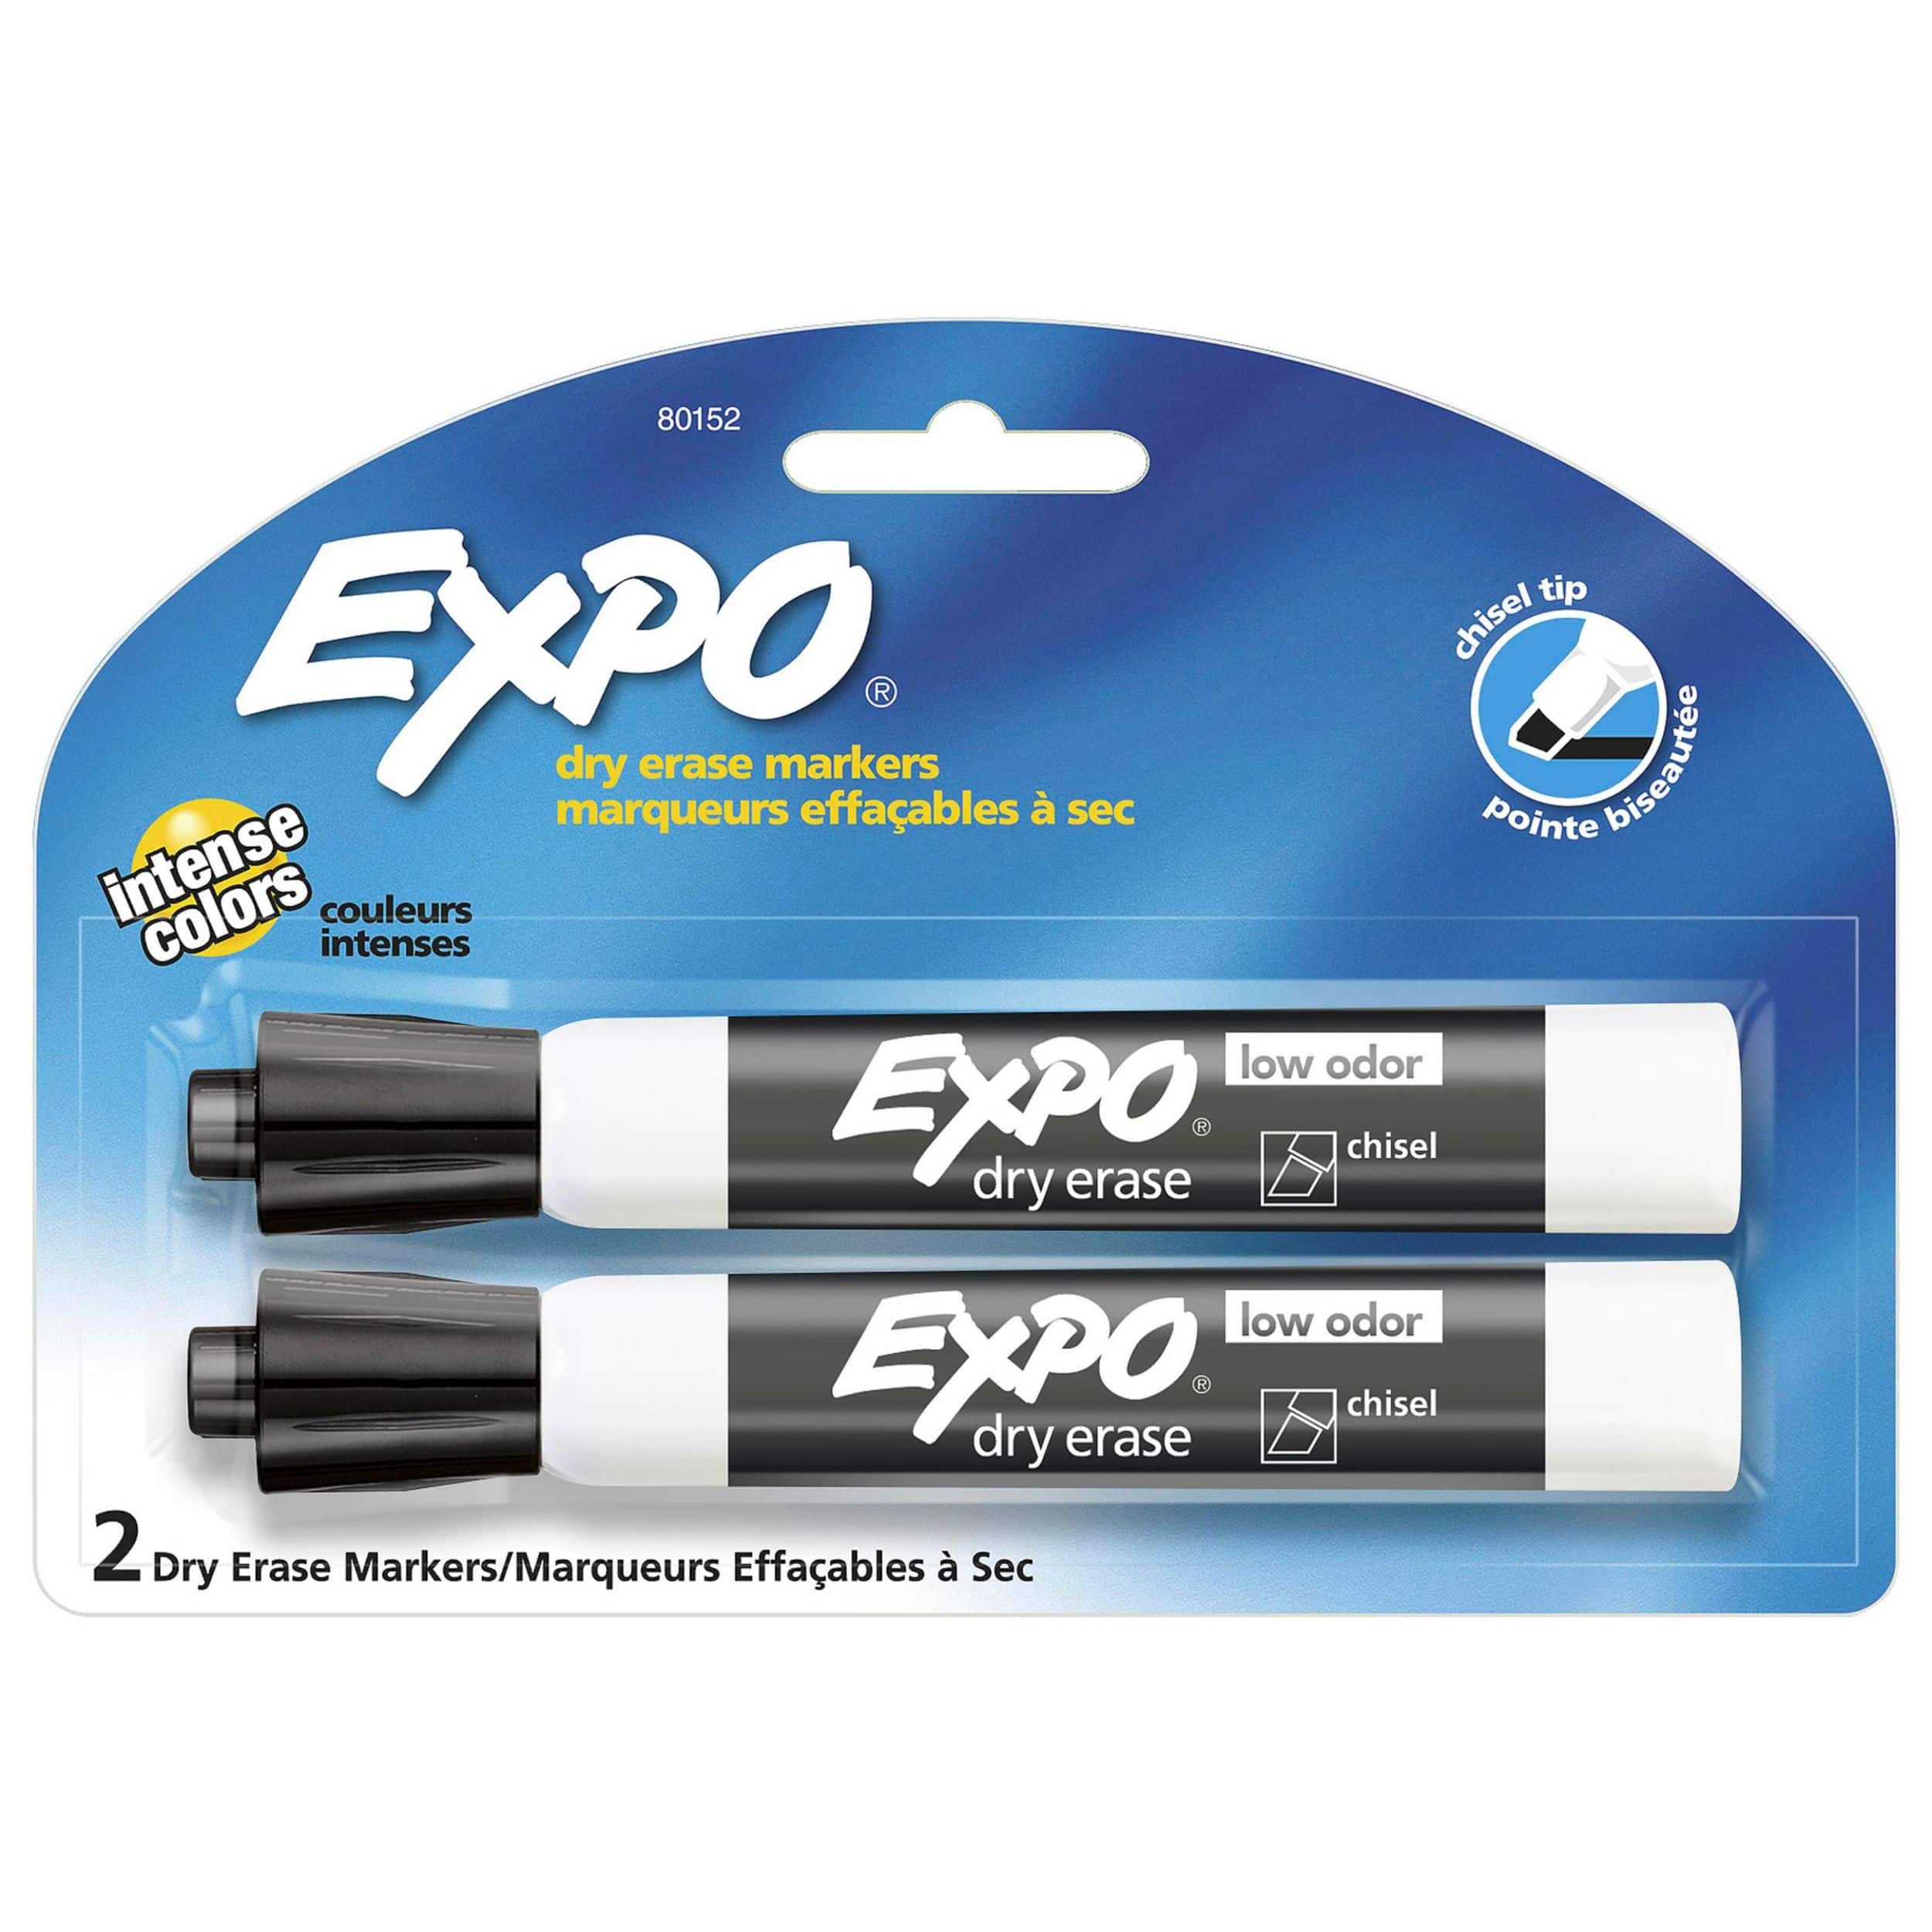 Expo 8pk Dry Erase Markers Chisel Tip Multicolored : Target